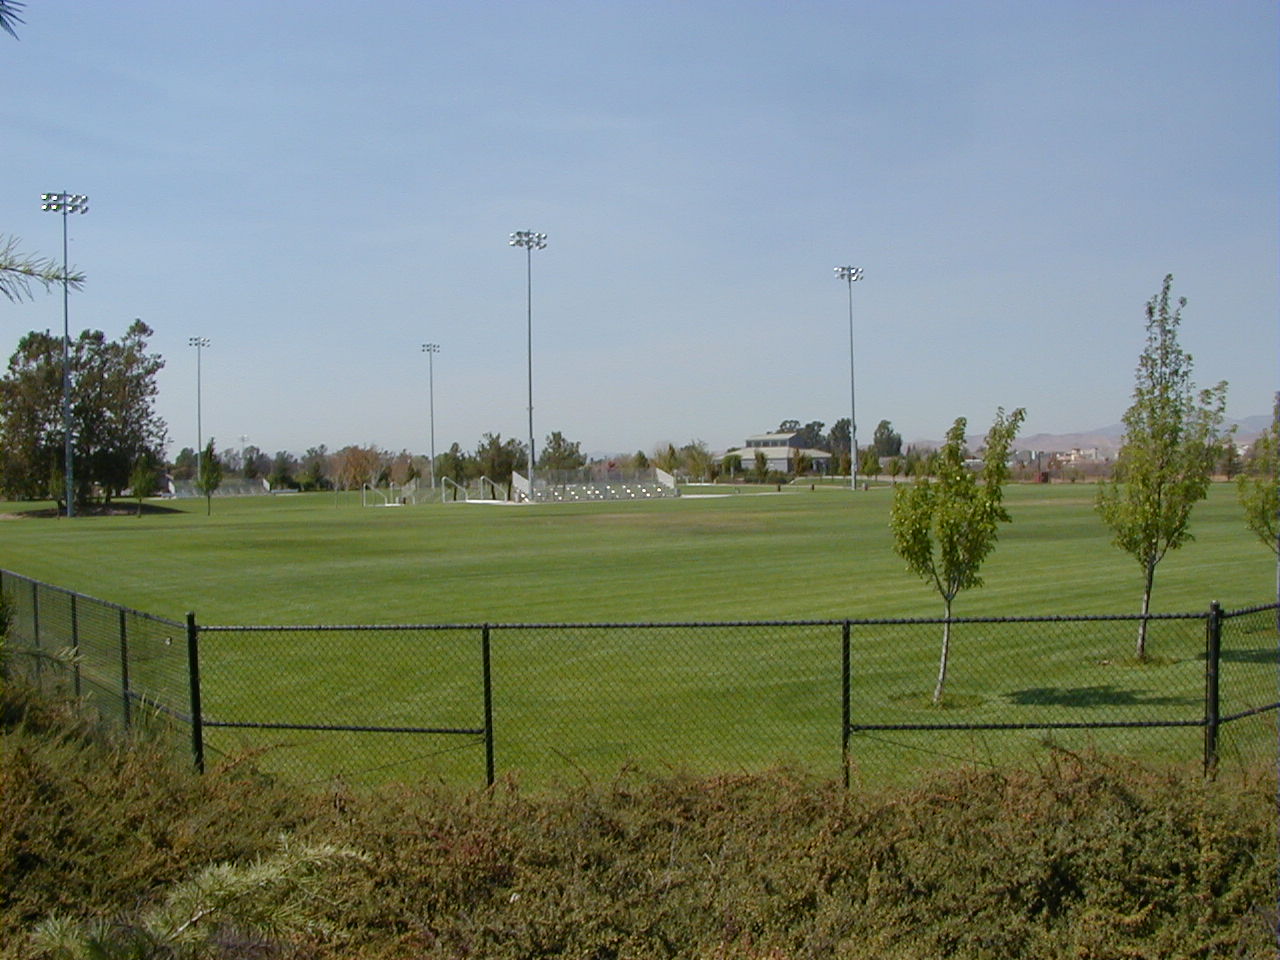 Sports complex with bleachers and lights